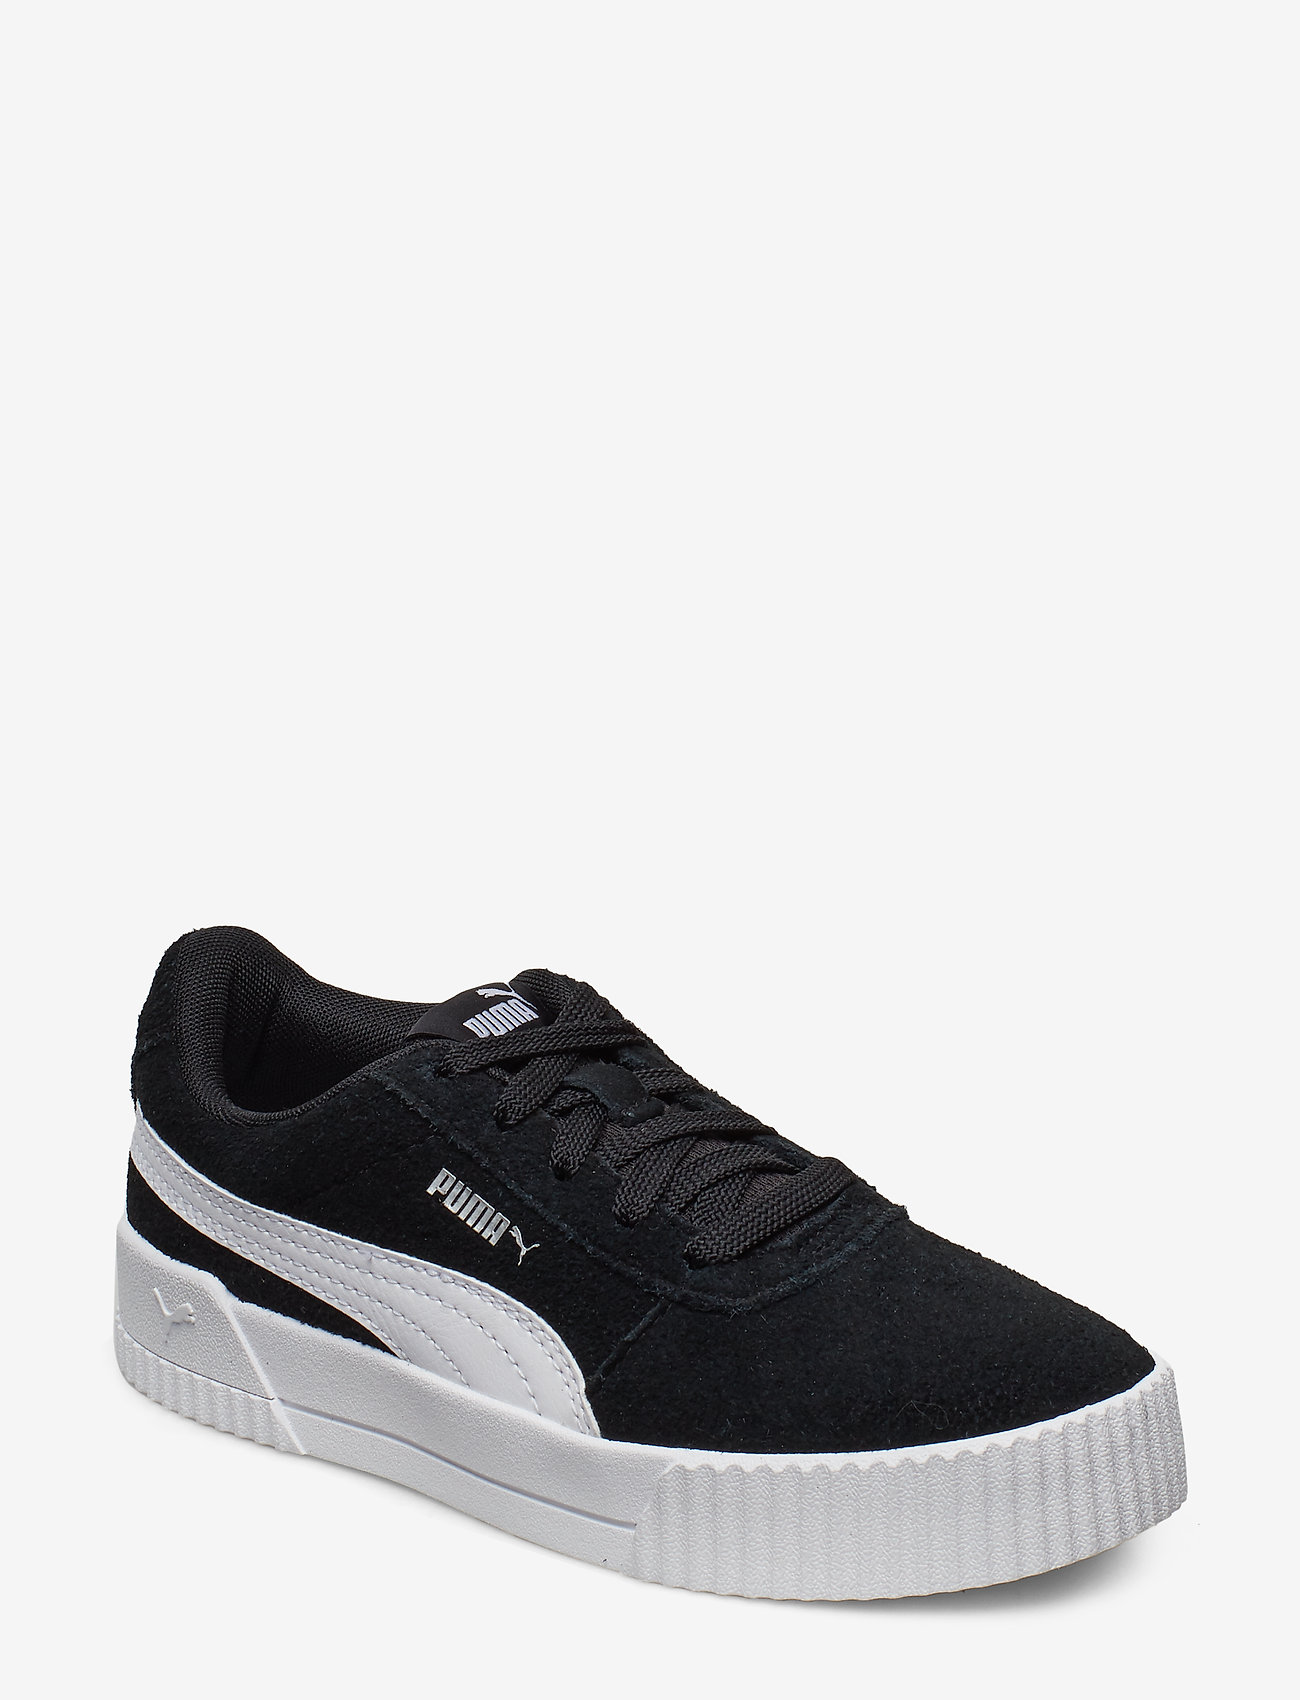 puma black synthetic leather casual shoes